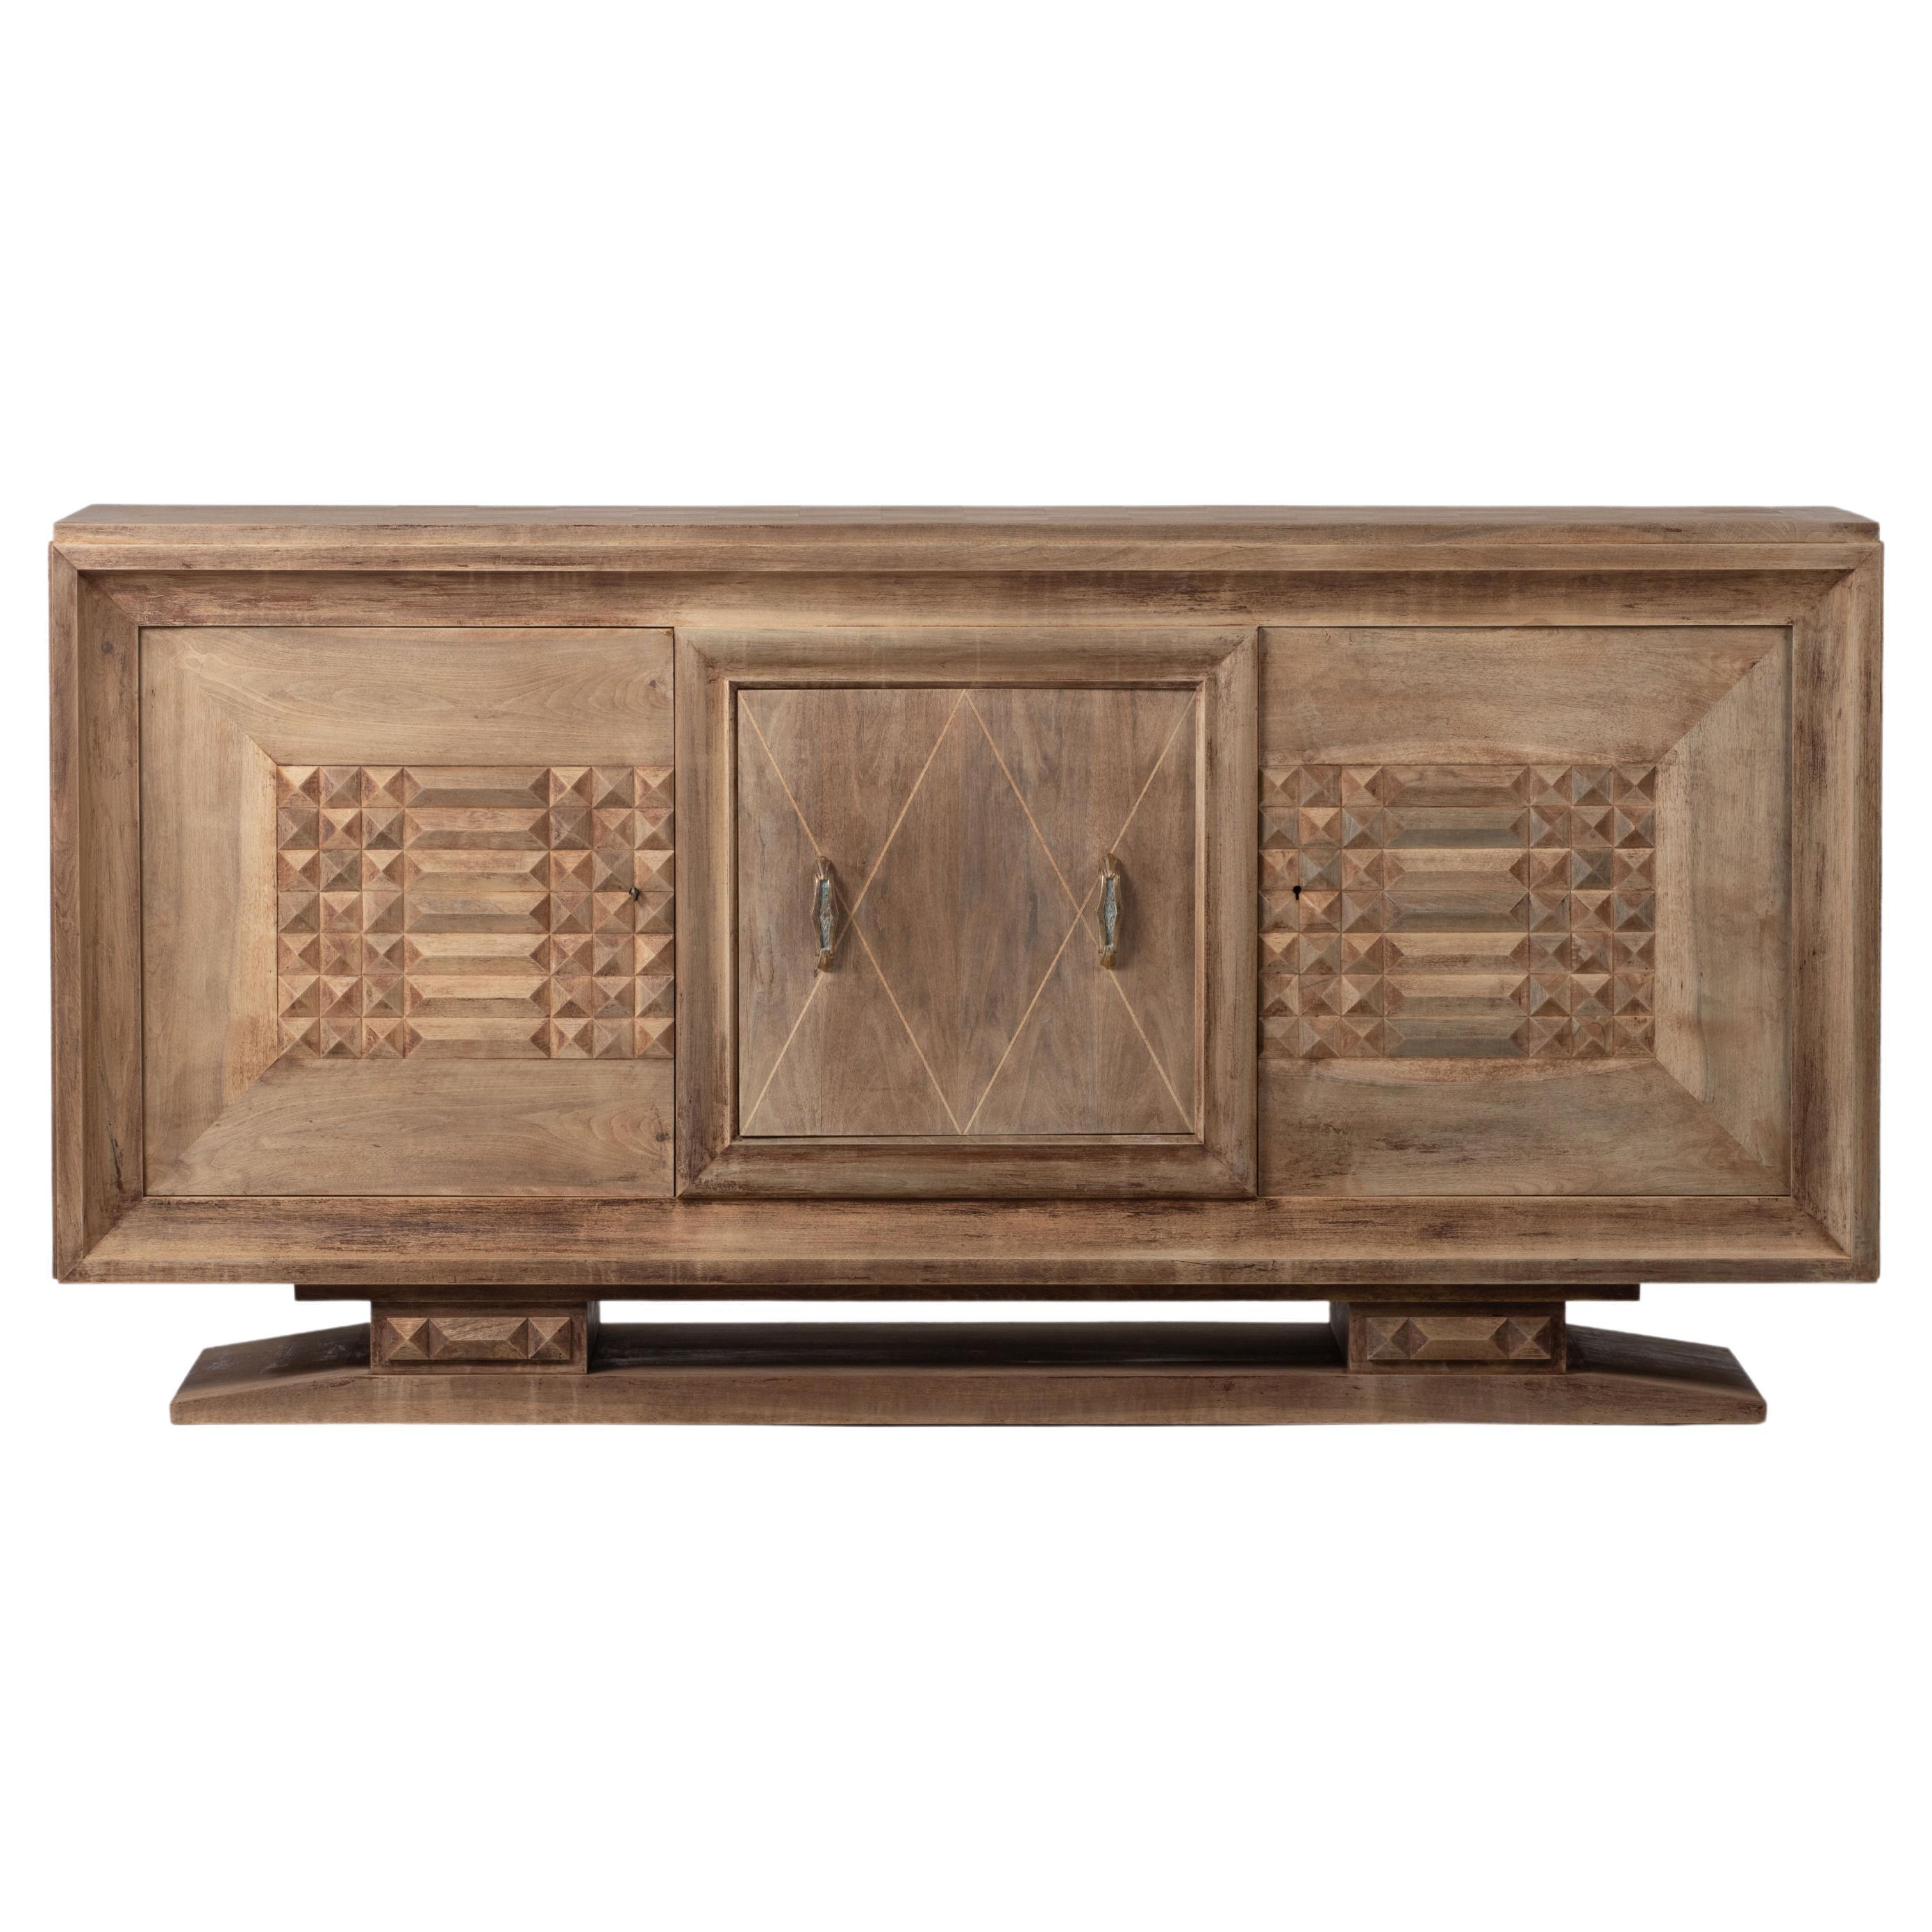 Bleached Art Deco Solid Oak Sideboard with Geometric Details, France, 1940s For Sale